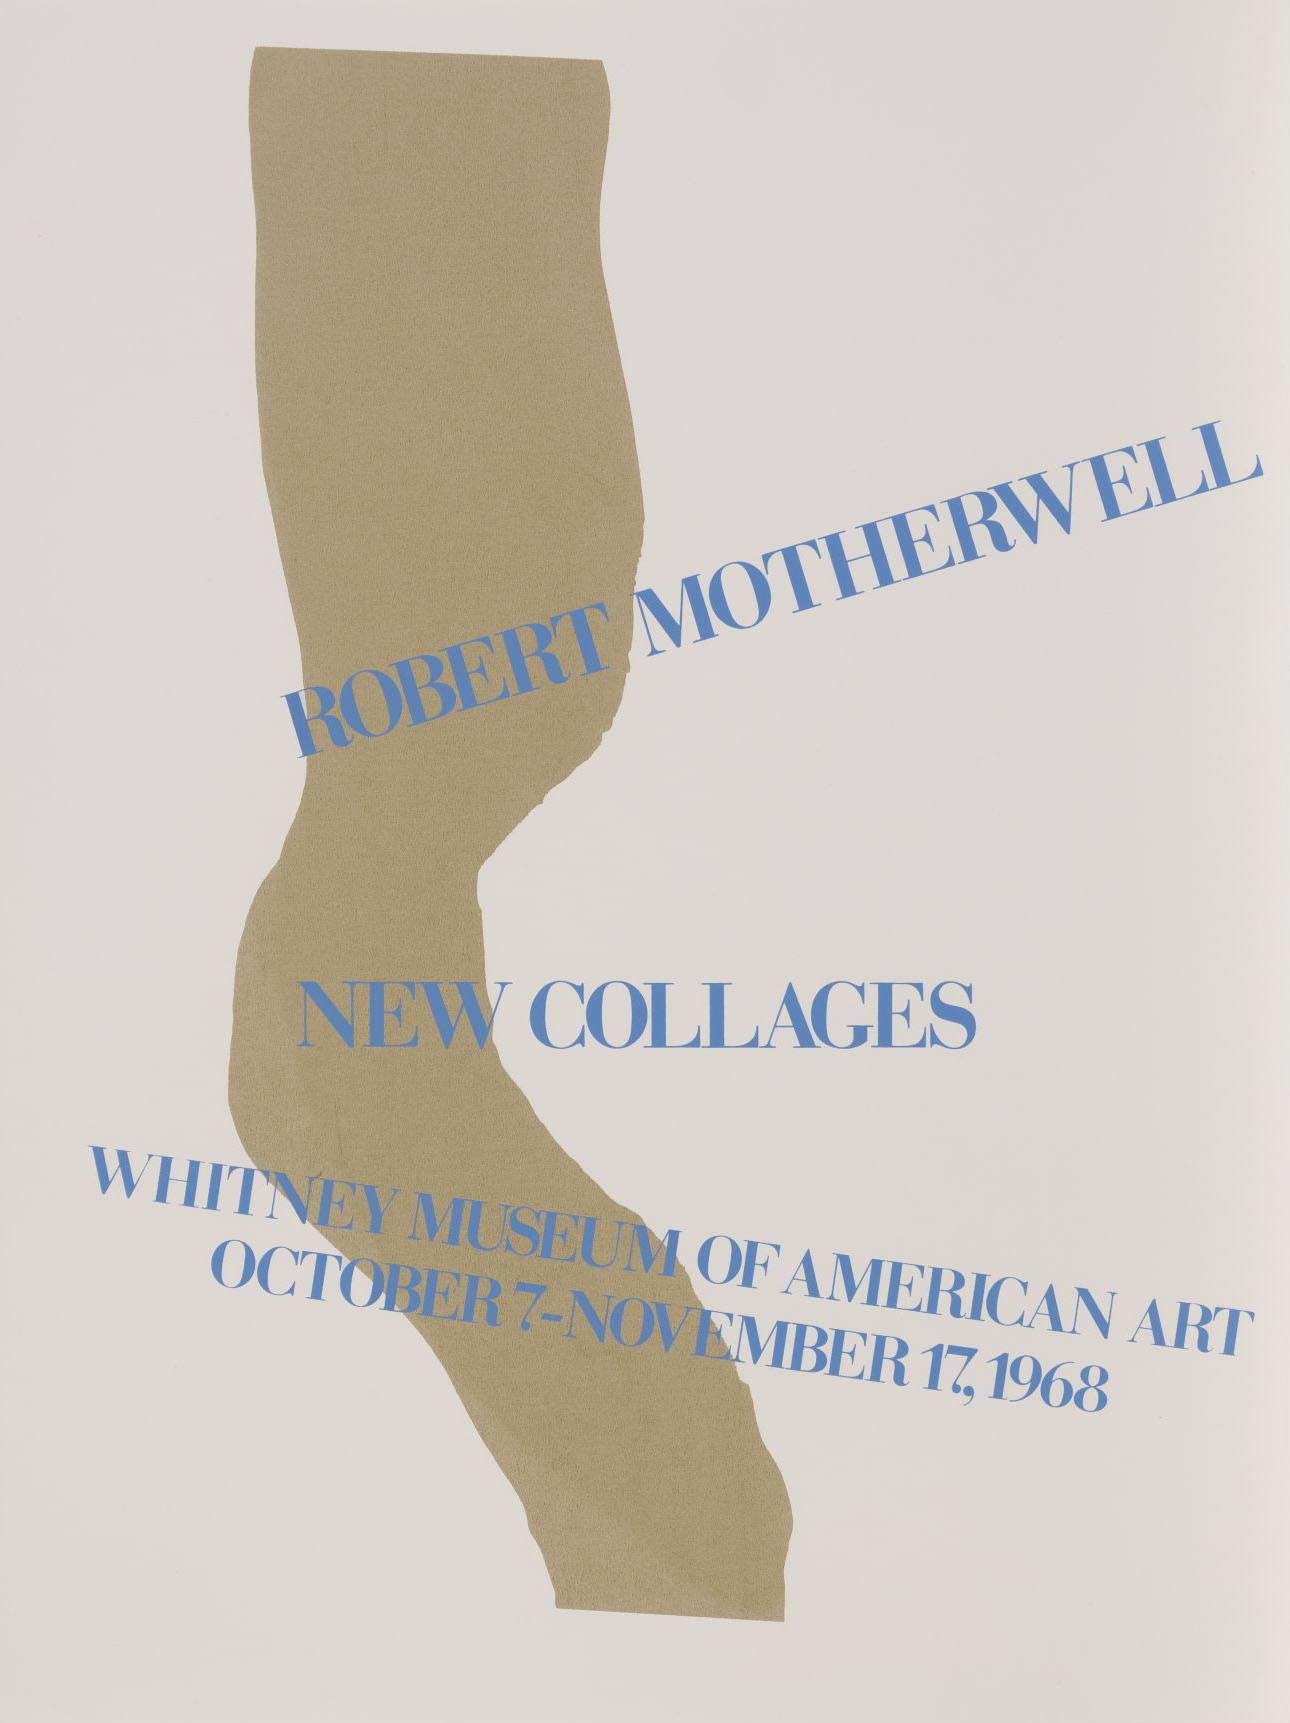 Exhibition poster from Robert Motherwell: New Collages at the Whitney Museum of American Art, New York, 1968